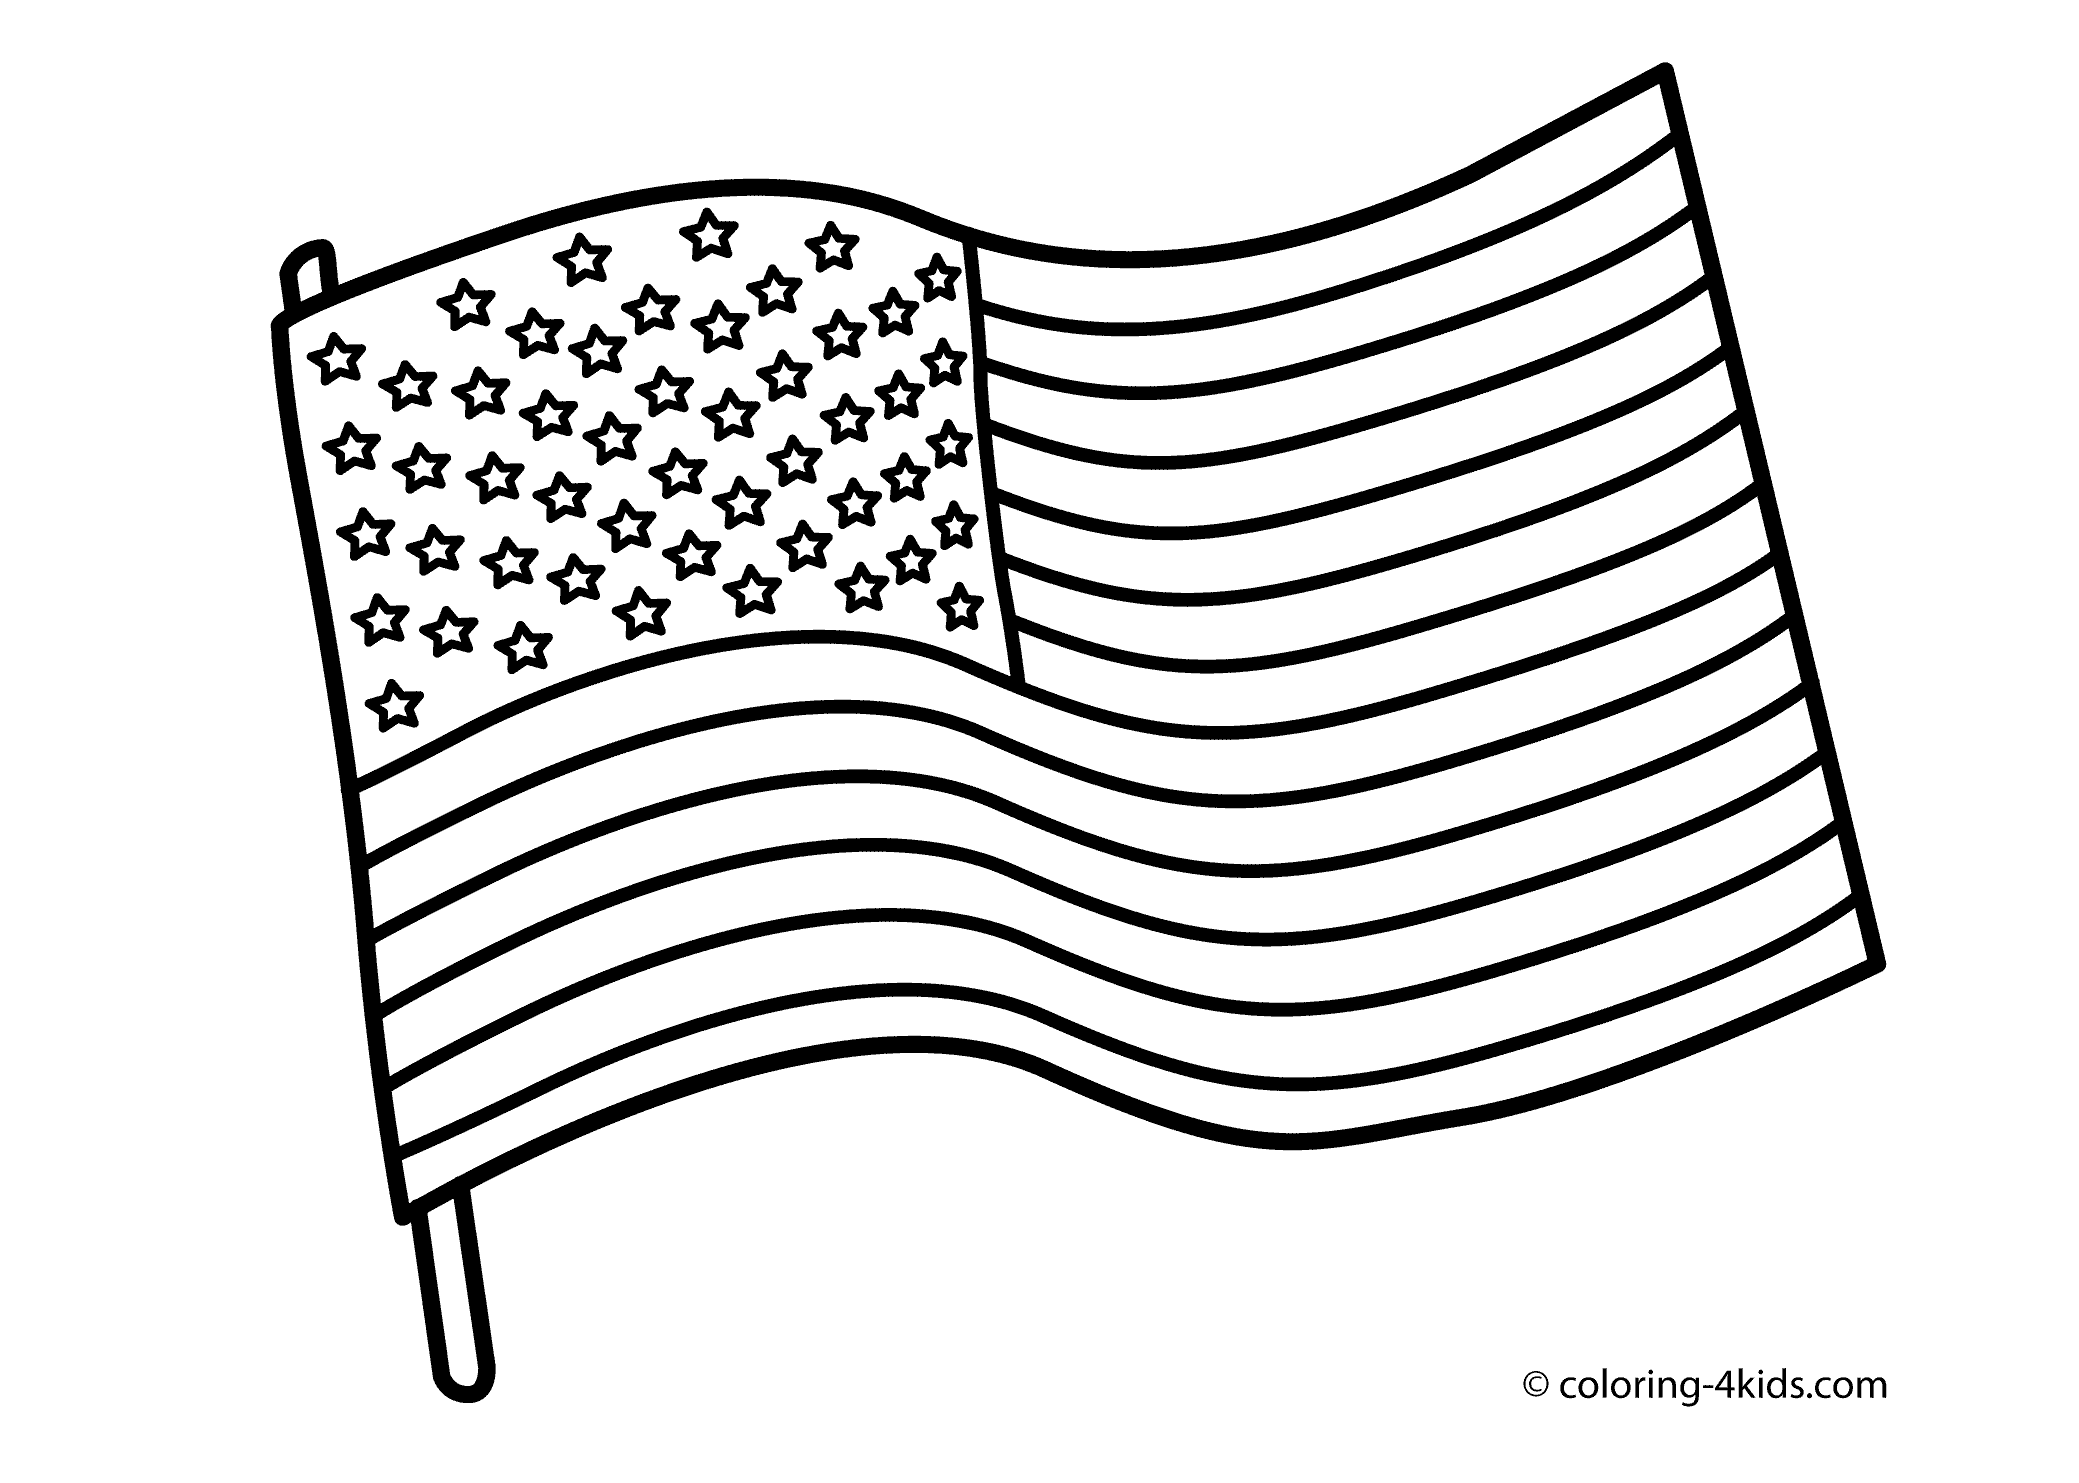 Flag coloring pages to download and print for free